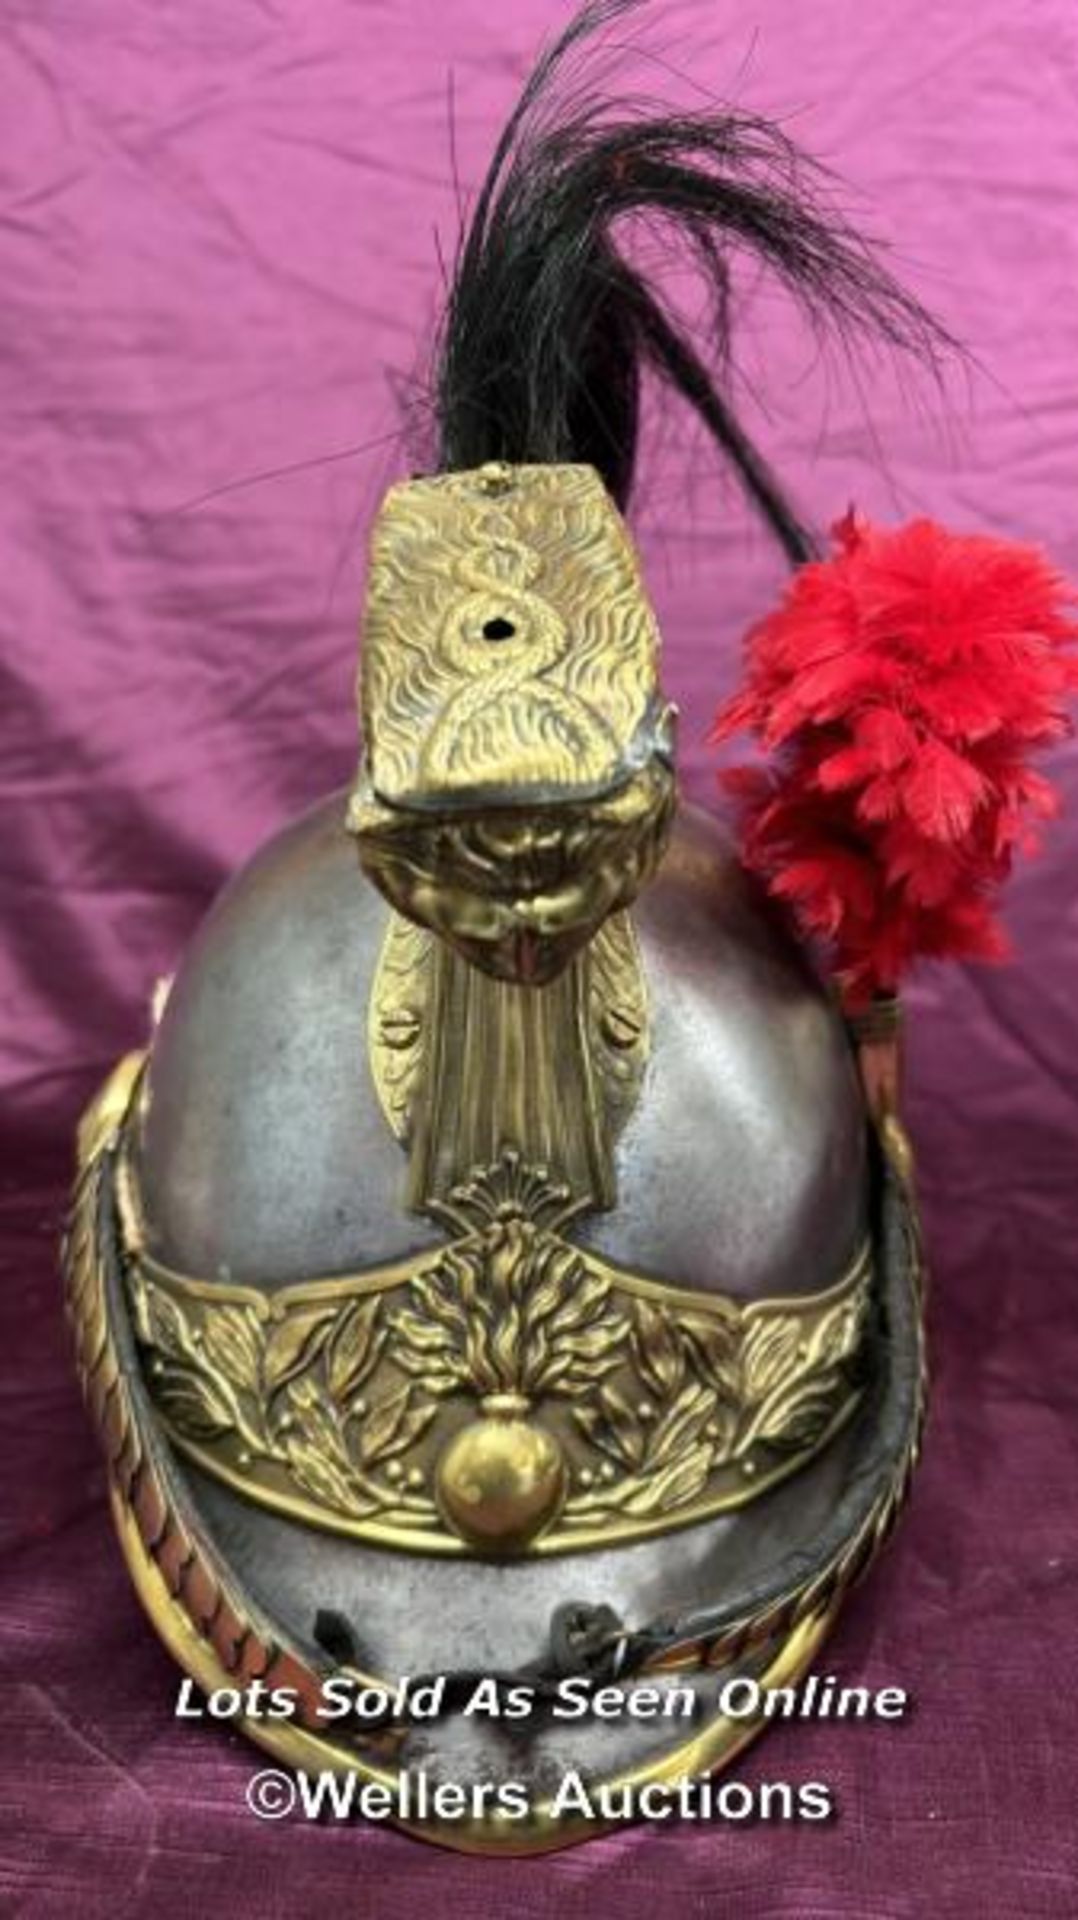 CIRCA 1870'S FRENCH CUIRASSIER HELMET - Image 3 of 5